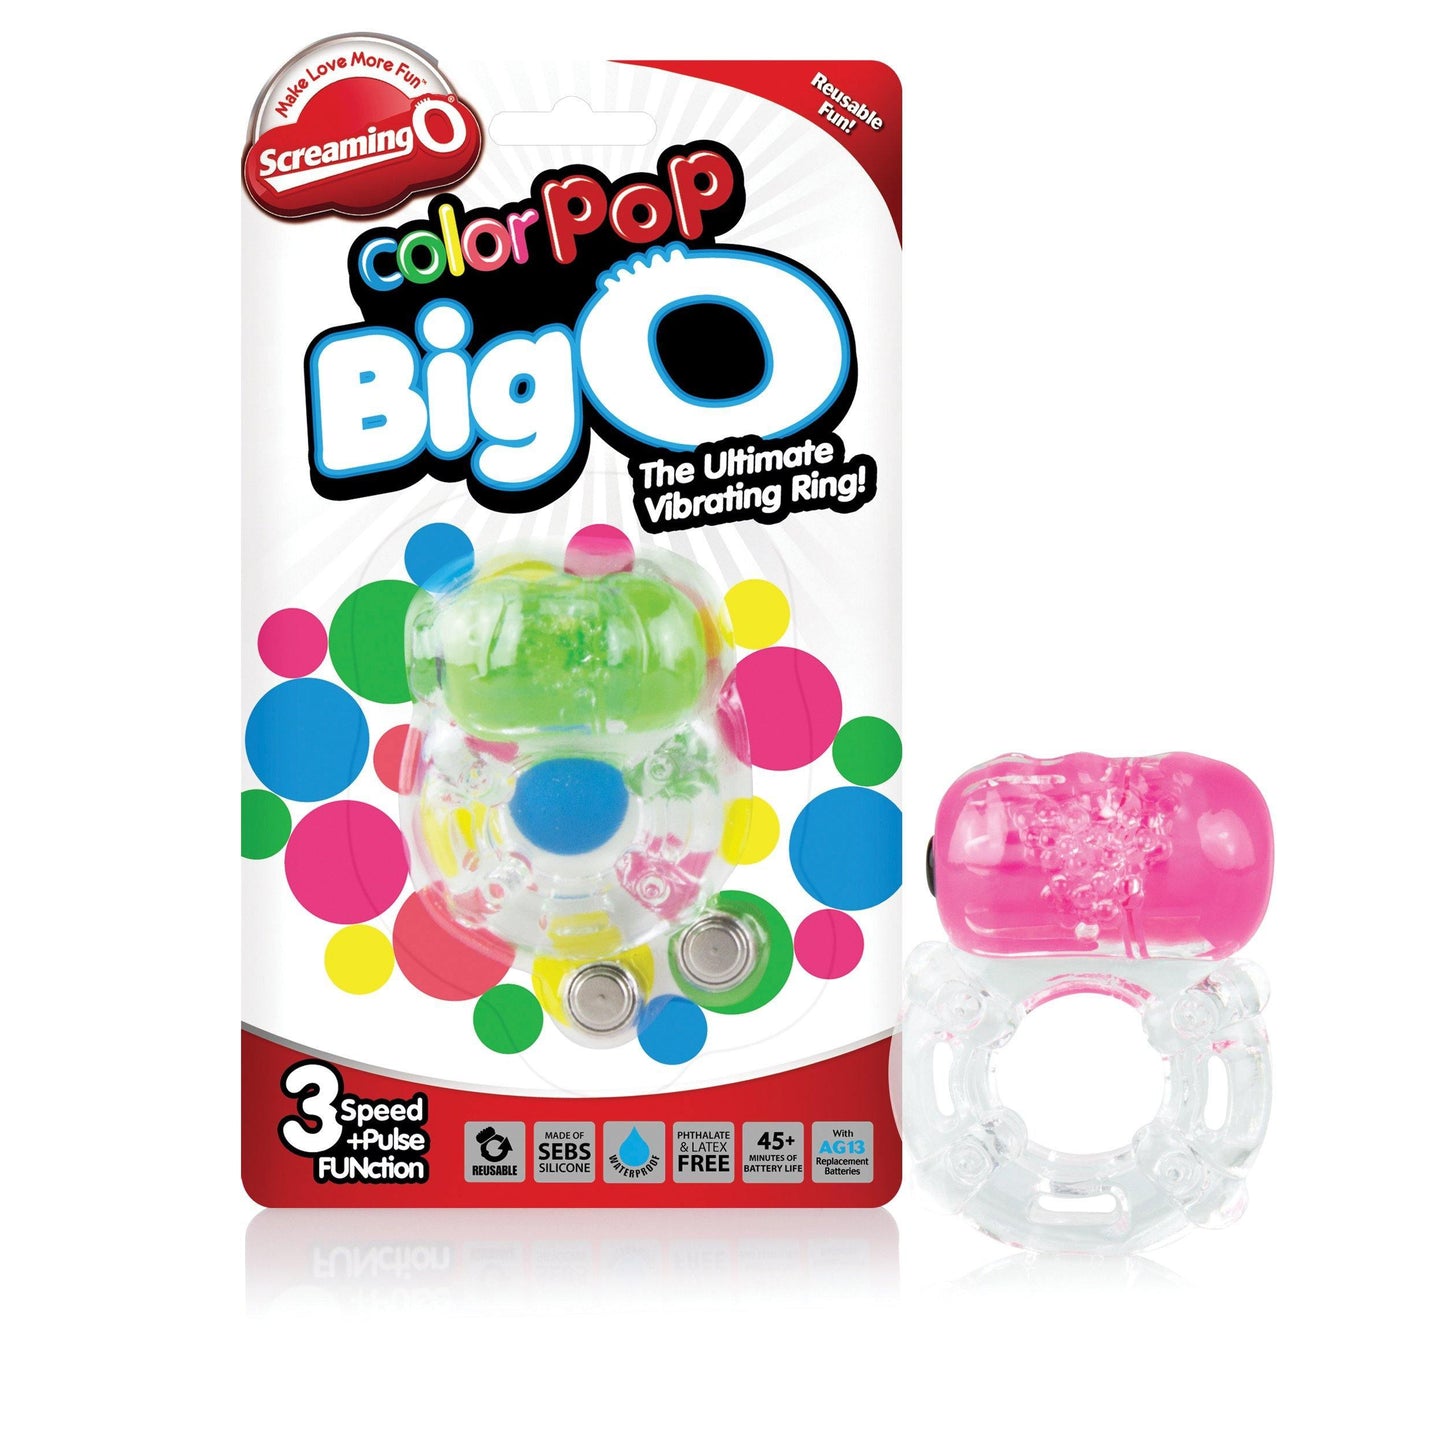 Screaming O Colorpop Big O - 6 Count Box - Assorted Colors - My Sex Toy Hub